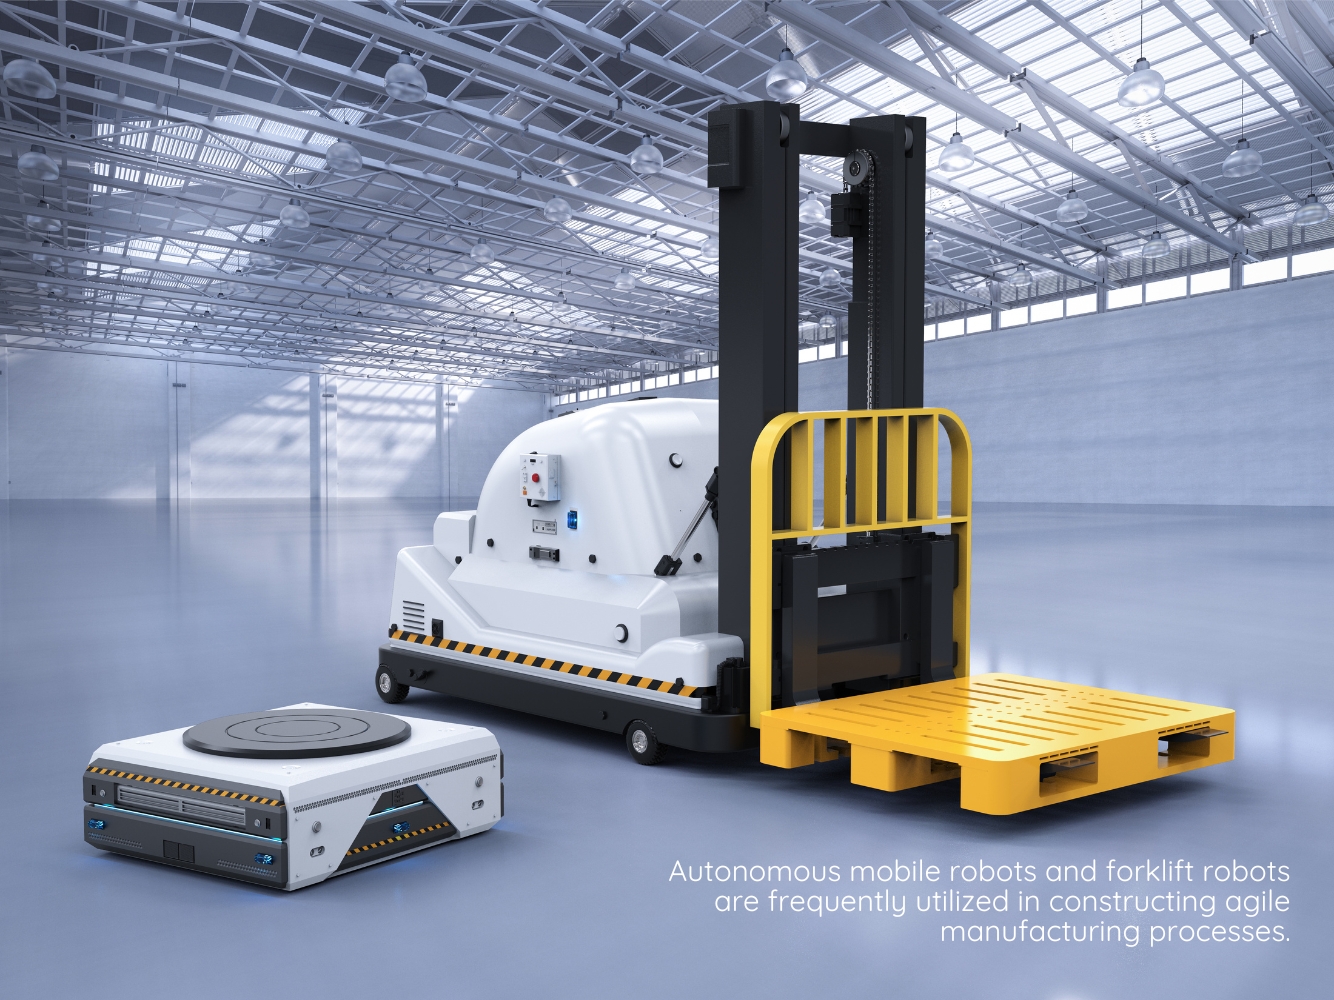 AMR and forklift robots are frequently used in agile manufacturing